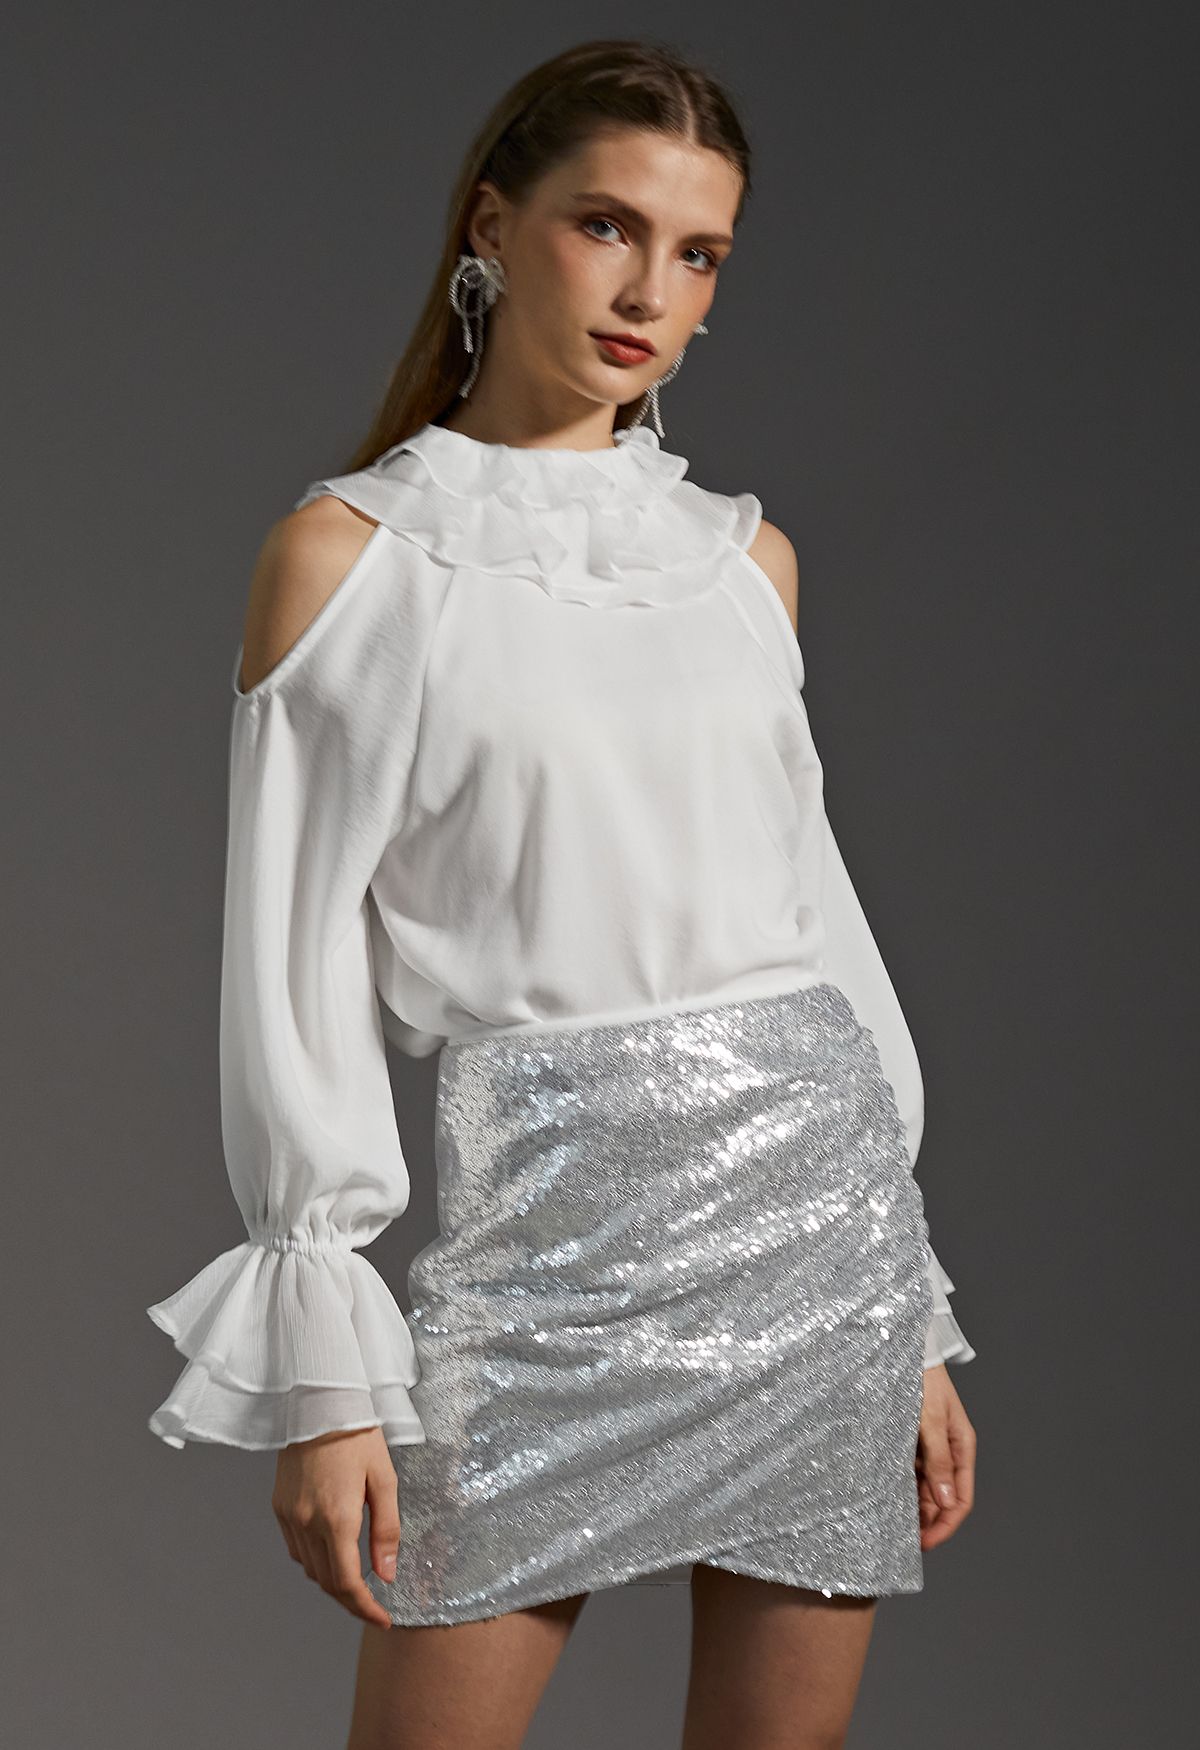 Tiered Ruffle Cold-Shoulder Chiffon Top in White